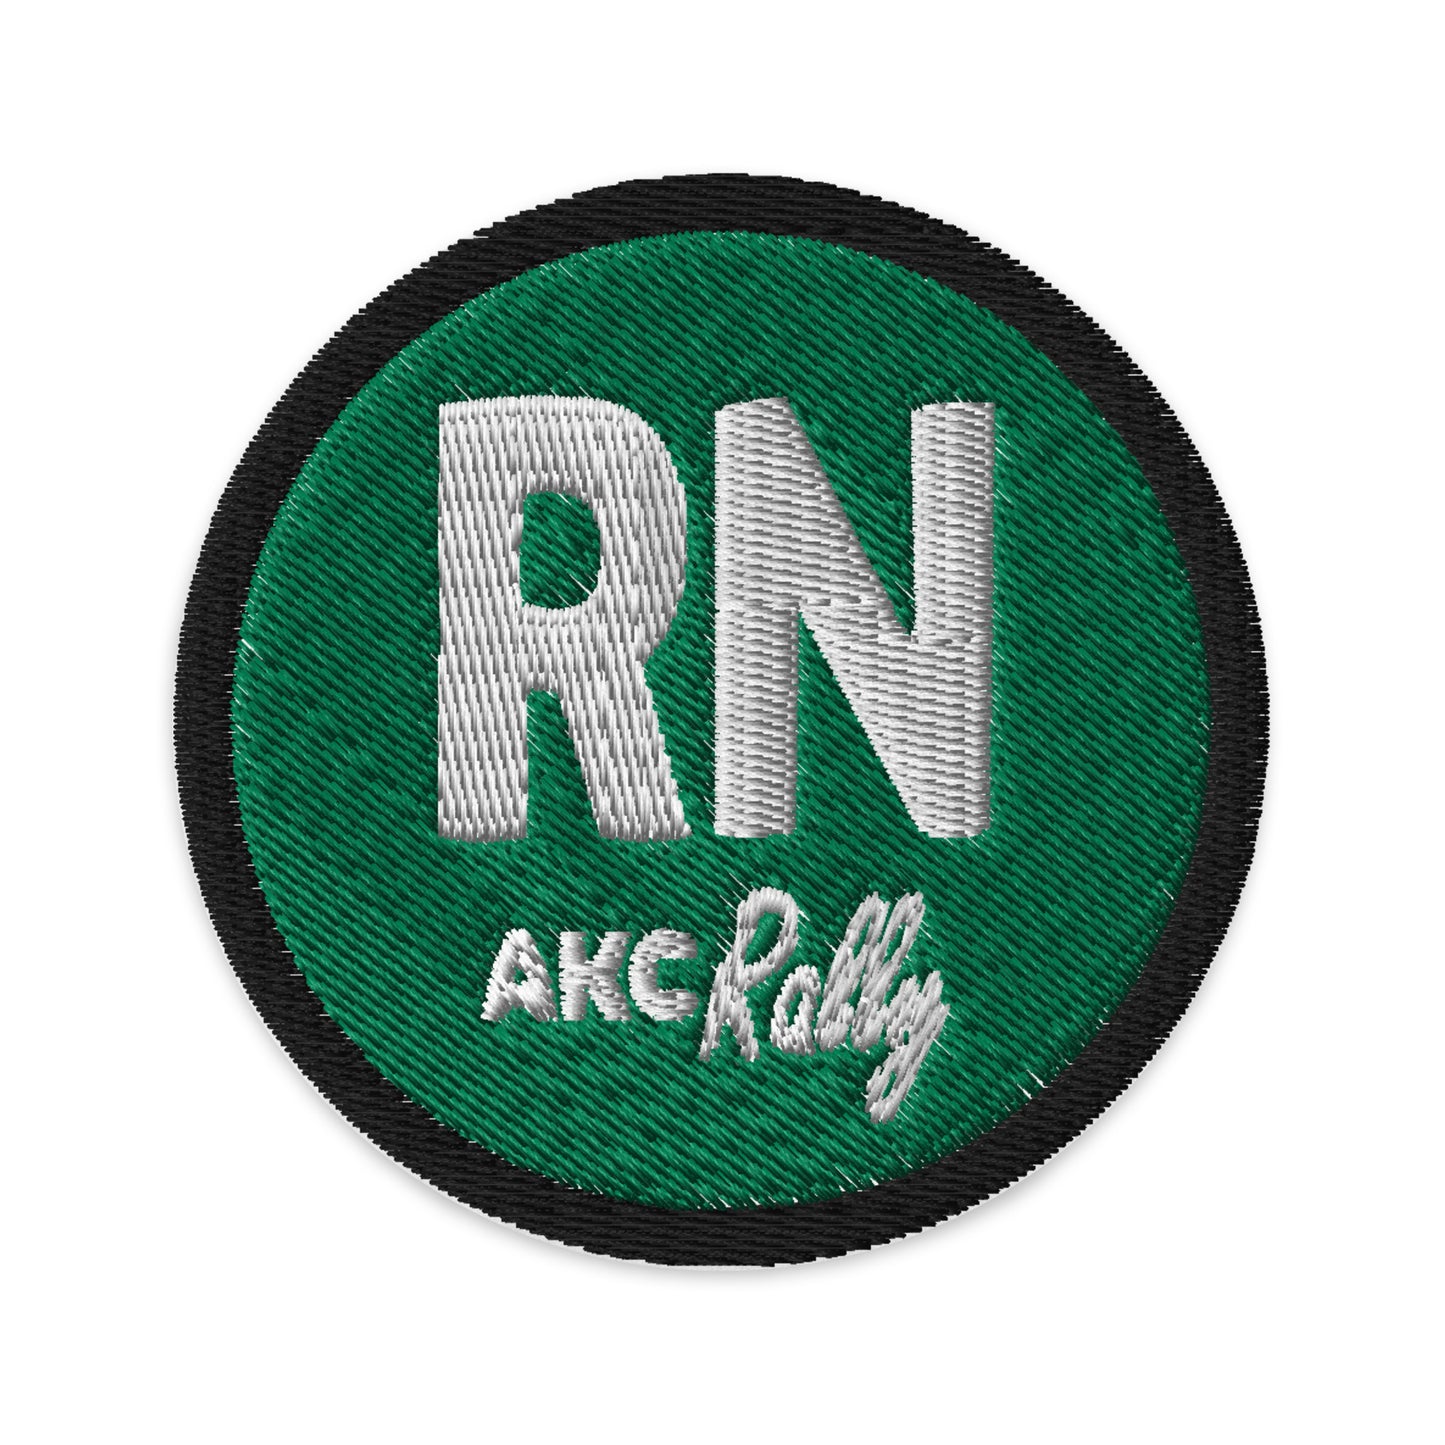 RALLY TITLE - RN - Embroidered patches